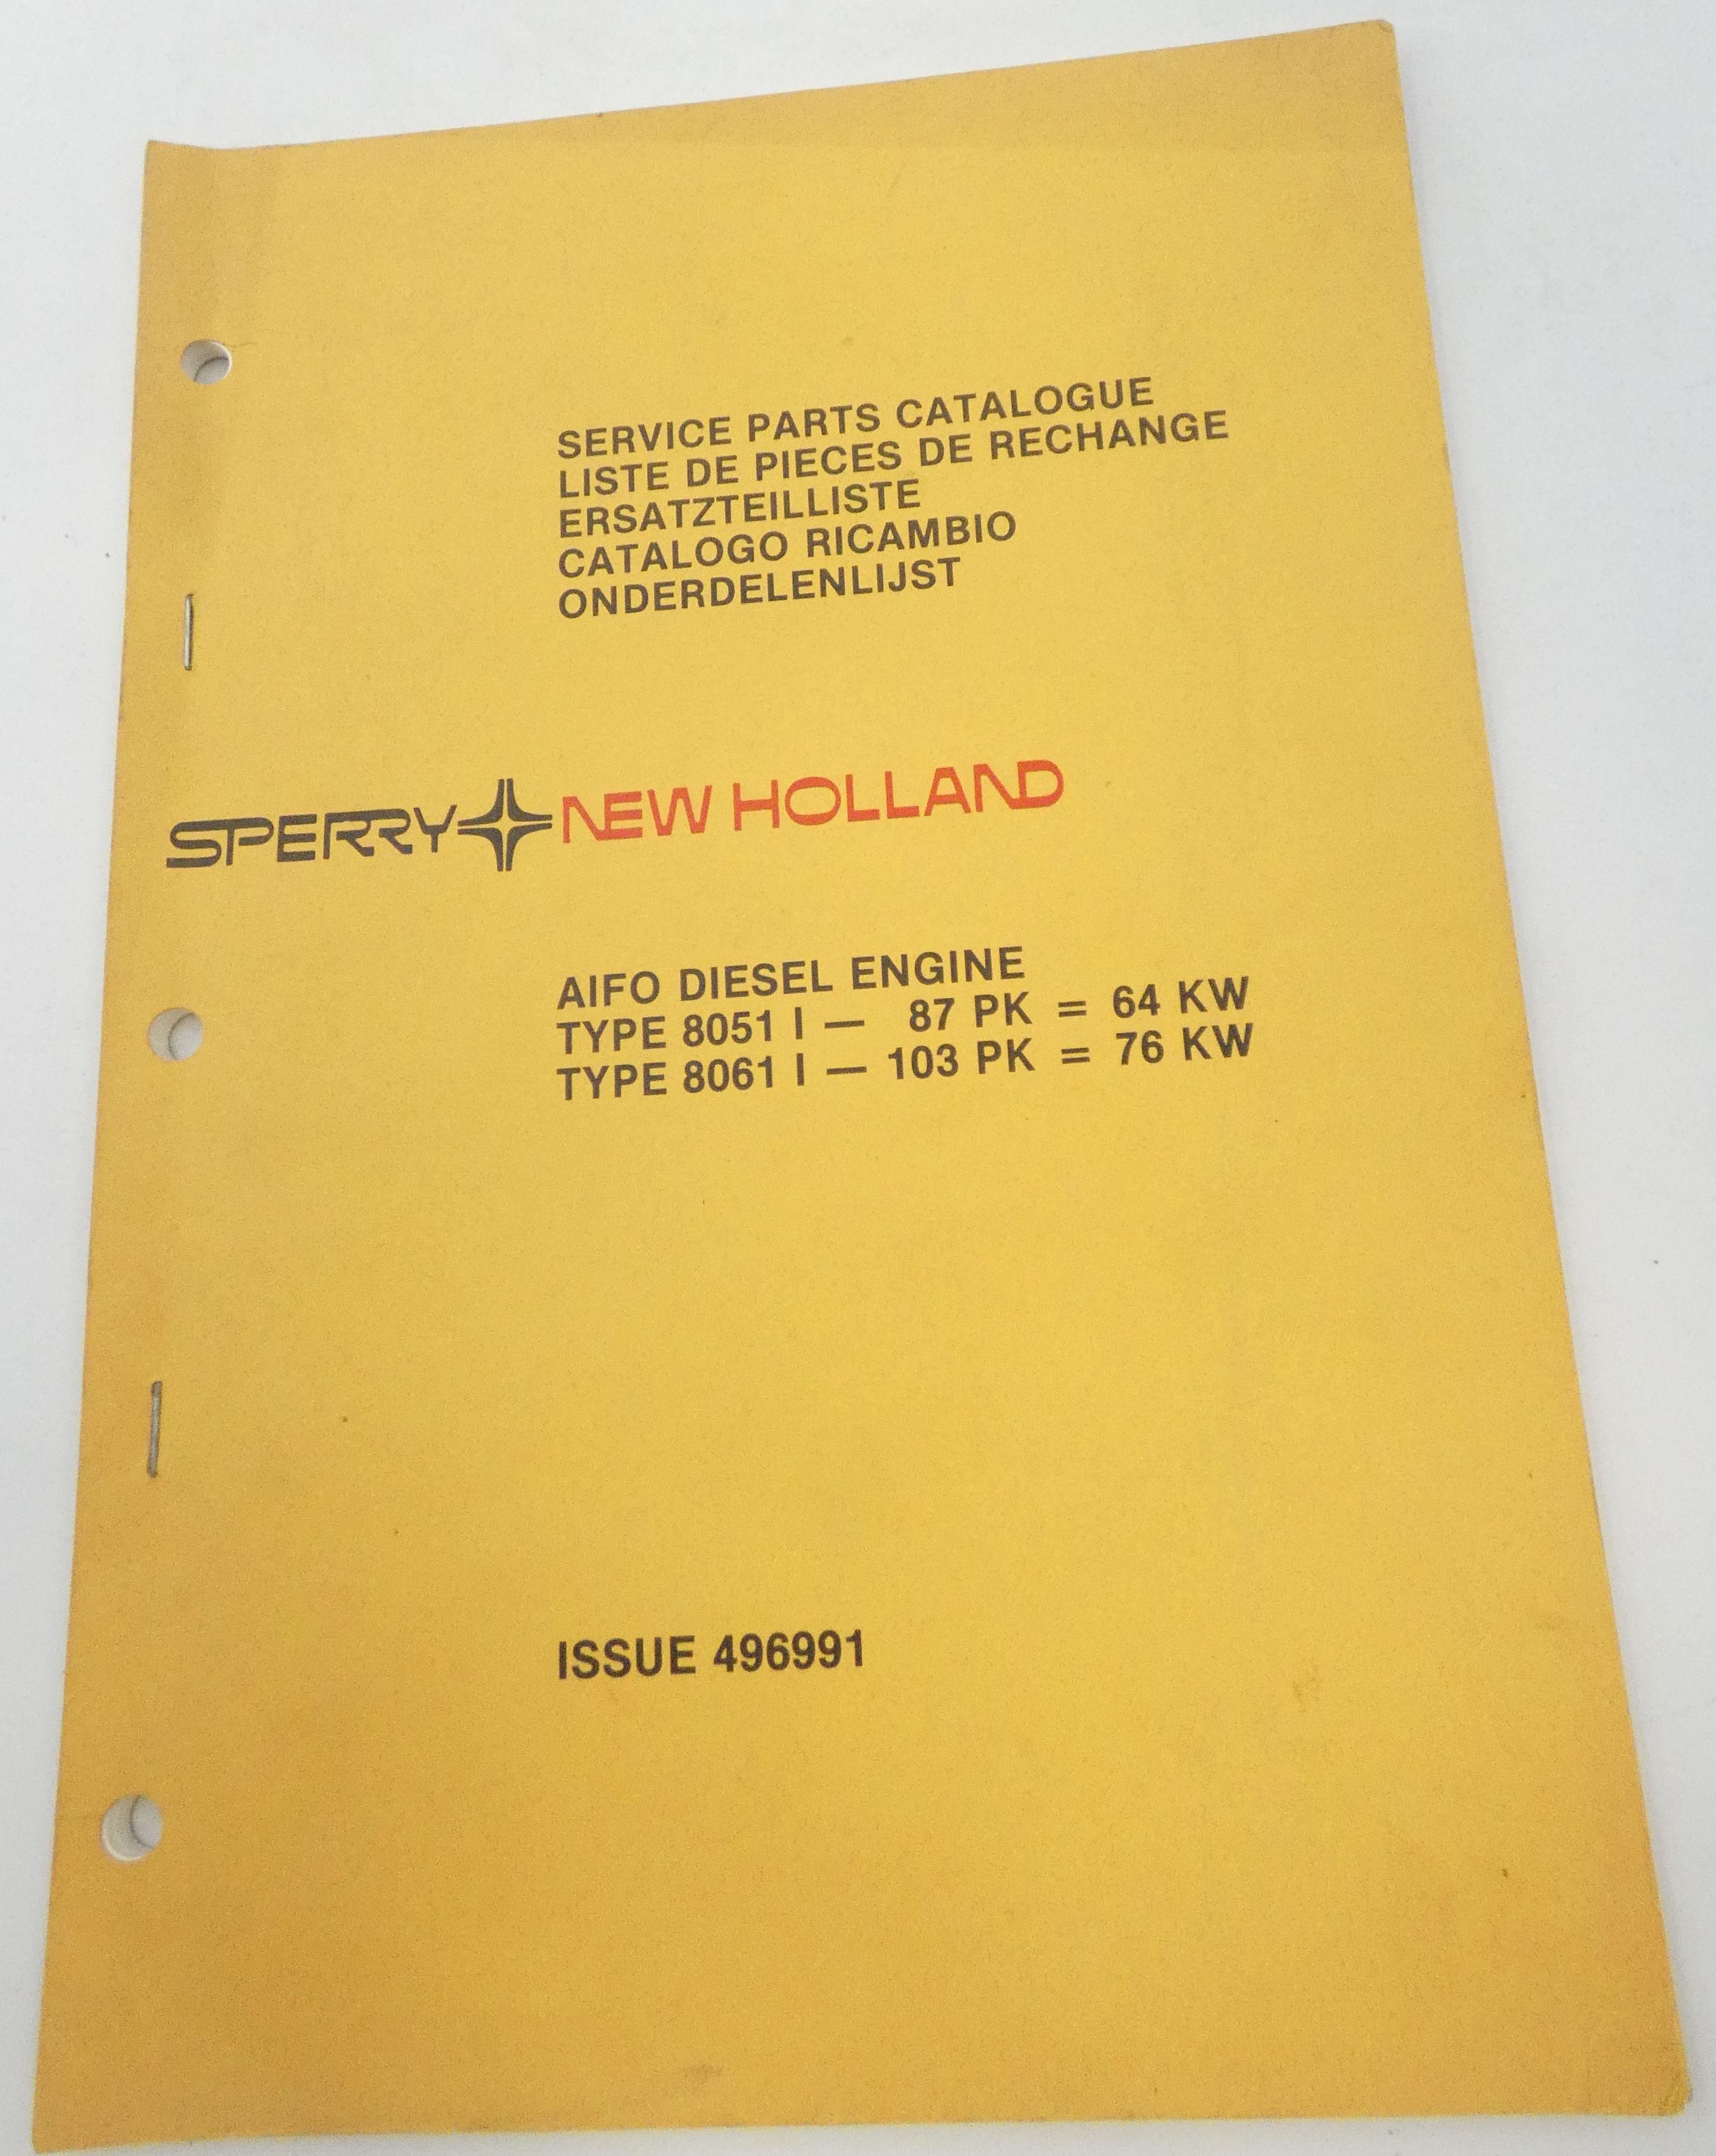 New Holland Aifo diesel engineering type 8051 I -87 PK = 64 kW, type 8061 I -103 = 103PK = 76 kW service parts catalogue